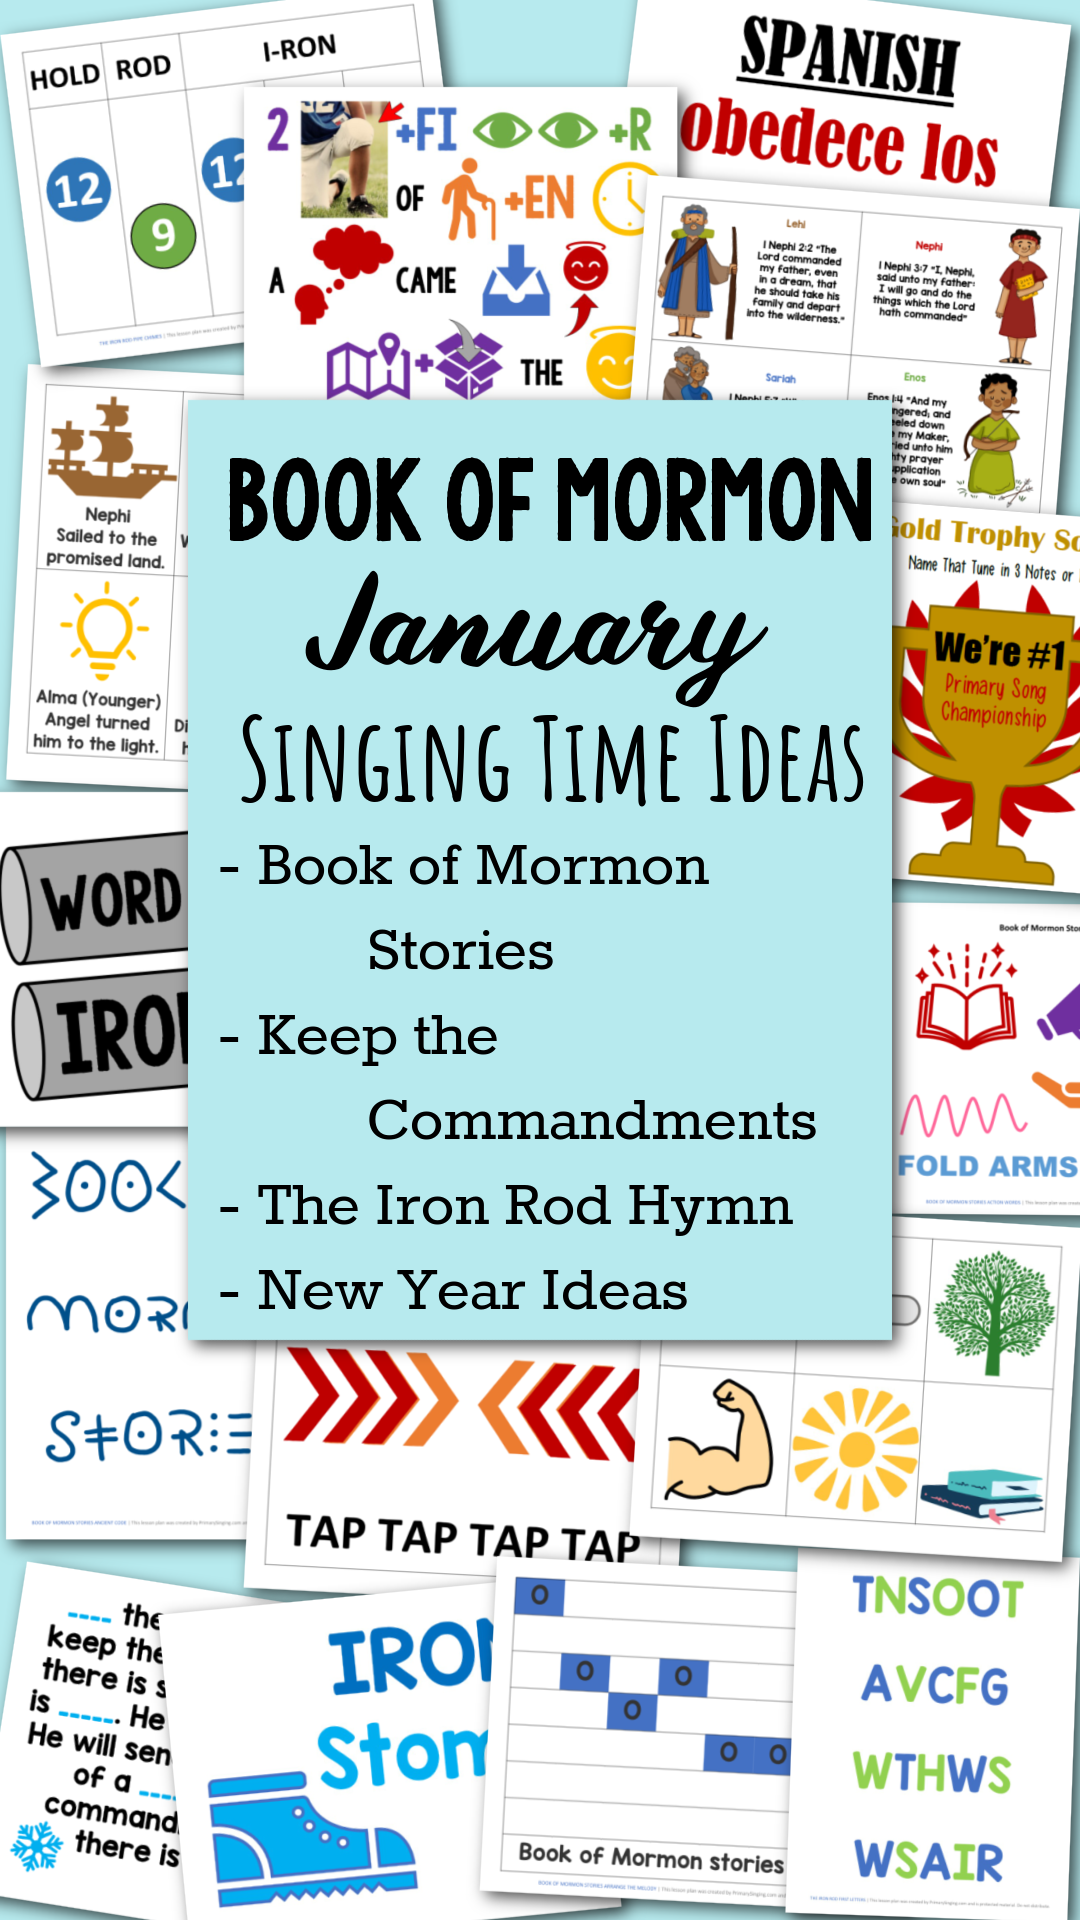 Book of Mormon January Primary Songs Singing Time ideas to help you teach Book of Mormon Stories, Keep the Commandments, and The Iron Rod Hymn. Plus, fun activities and ideas for the New Year! This packet is jam packed full with lesson plans and printable song helps for LDS Primary music leaders and great for home Come Follow Me use for families, too.